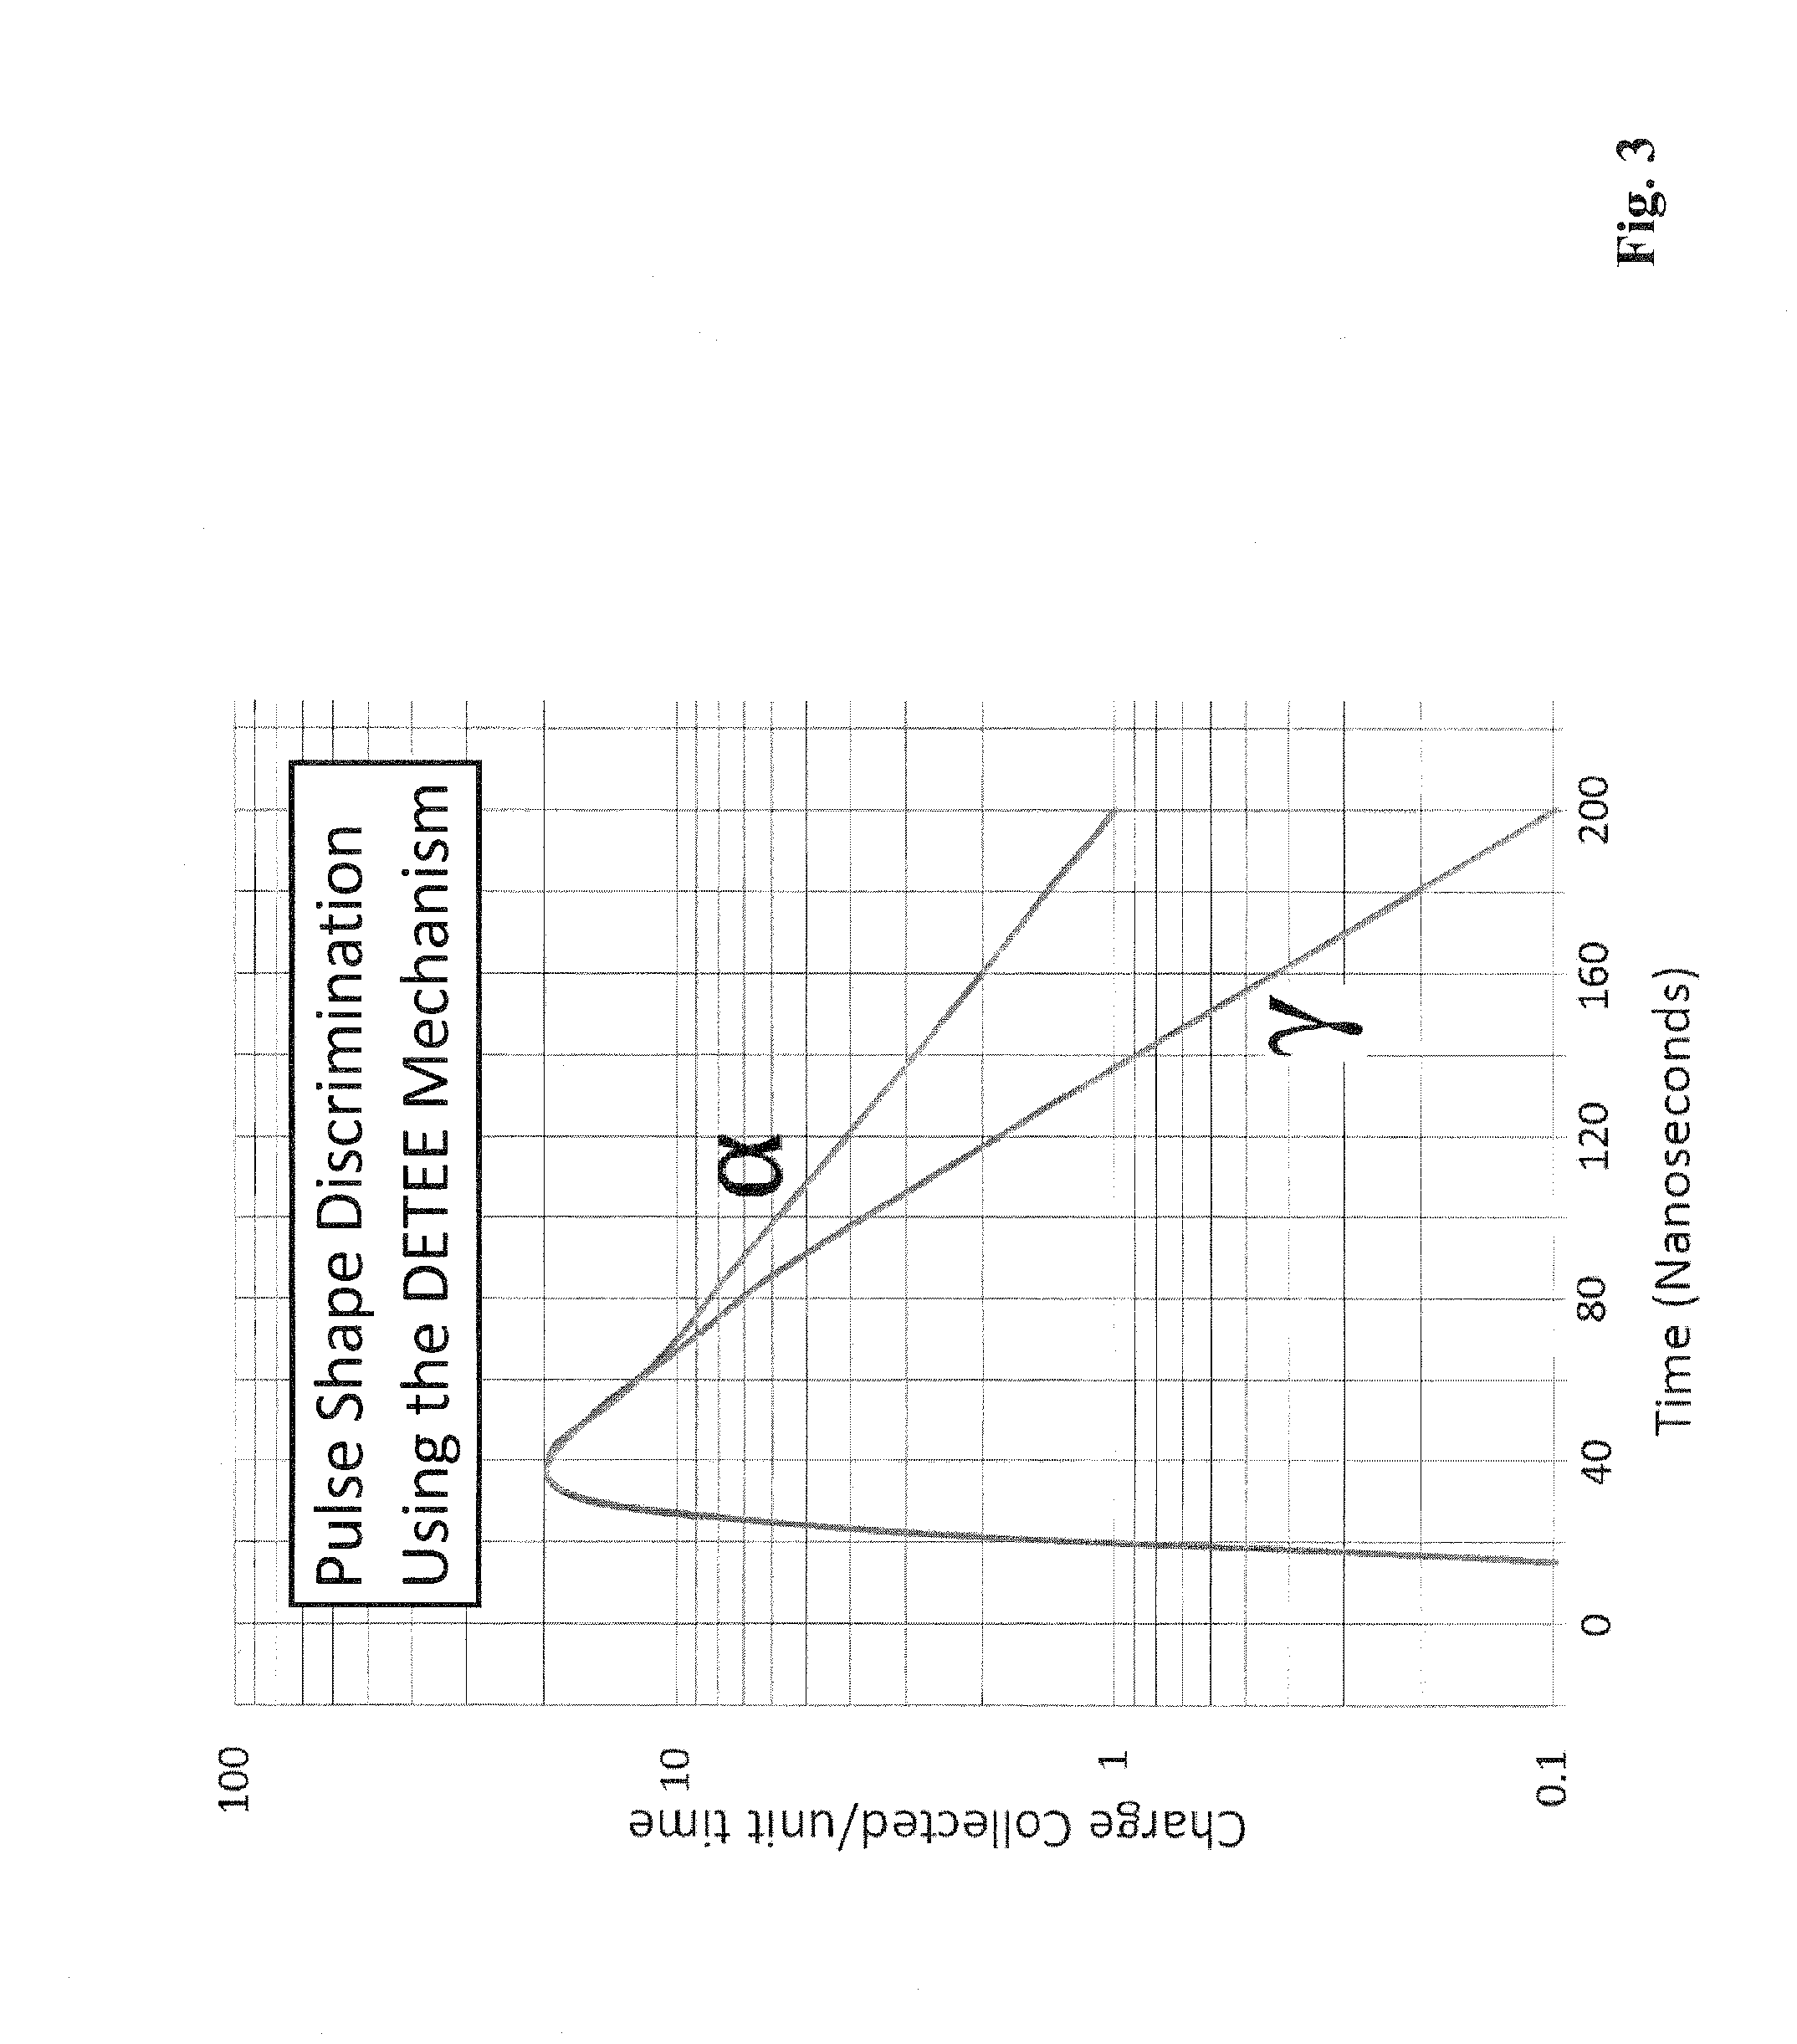 Materials, method, and apparatus for detecting neutrons and ionizing radiation